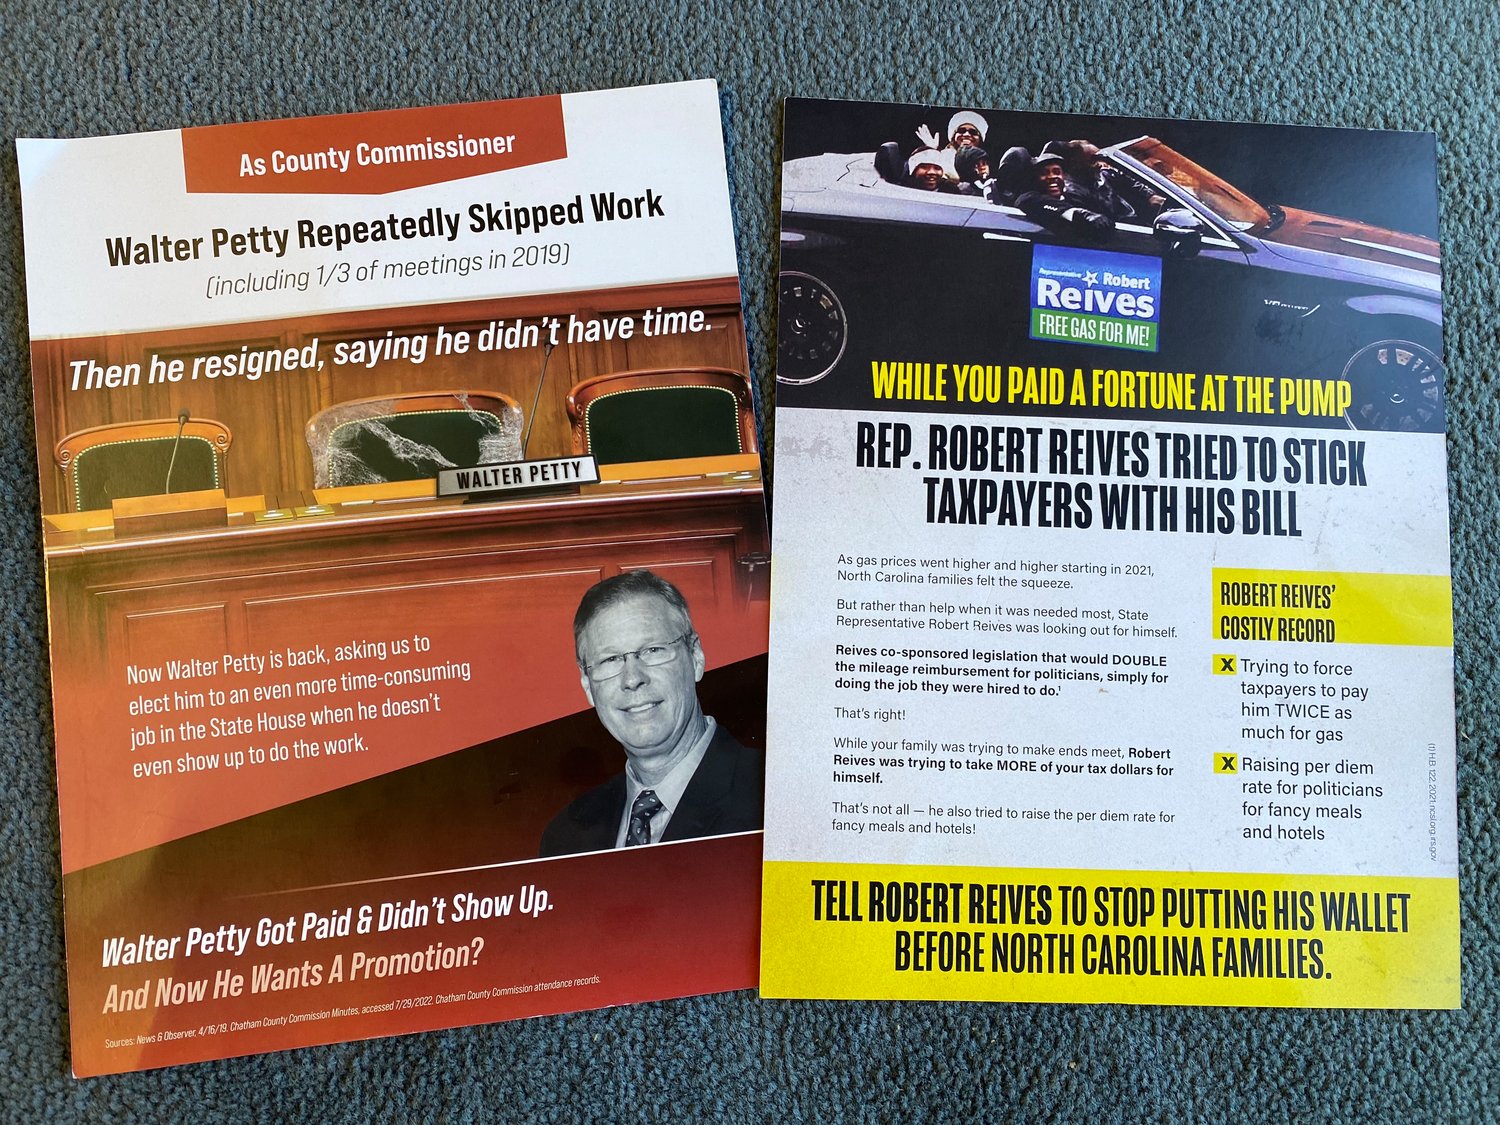 Examples of negative political mailers sent to Dist. 54 voters.